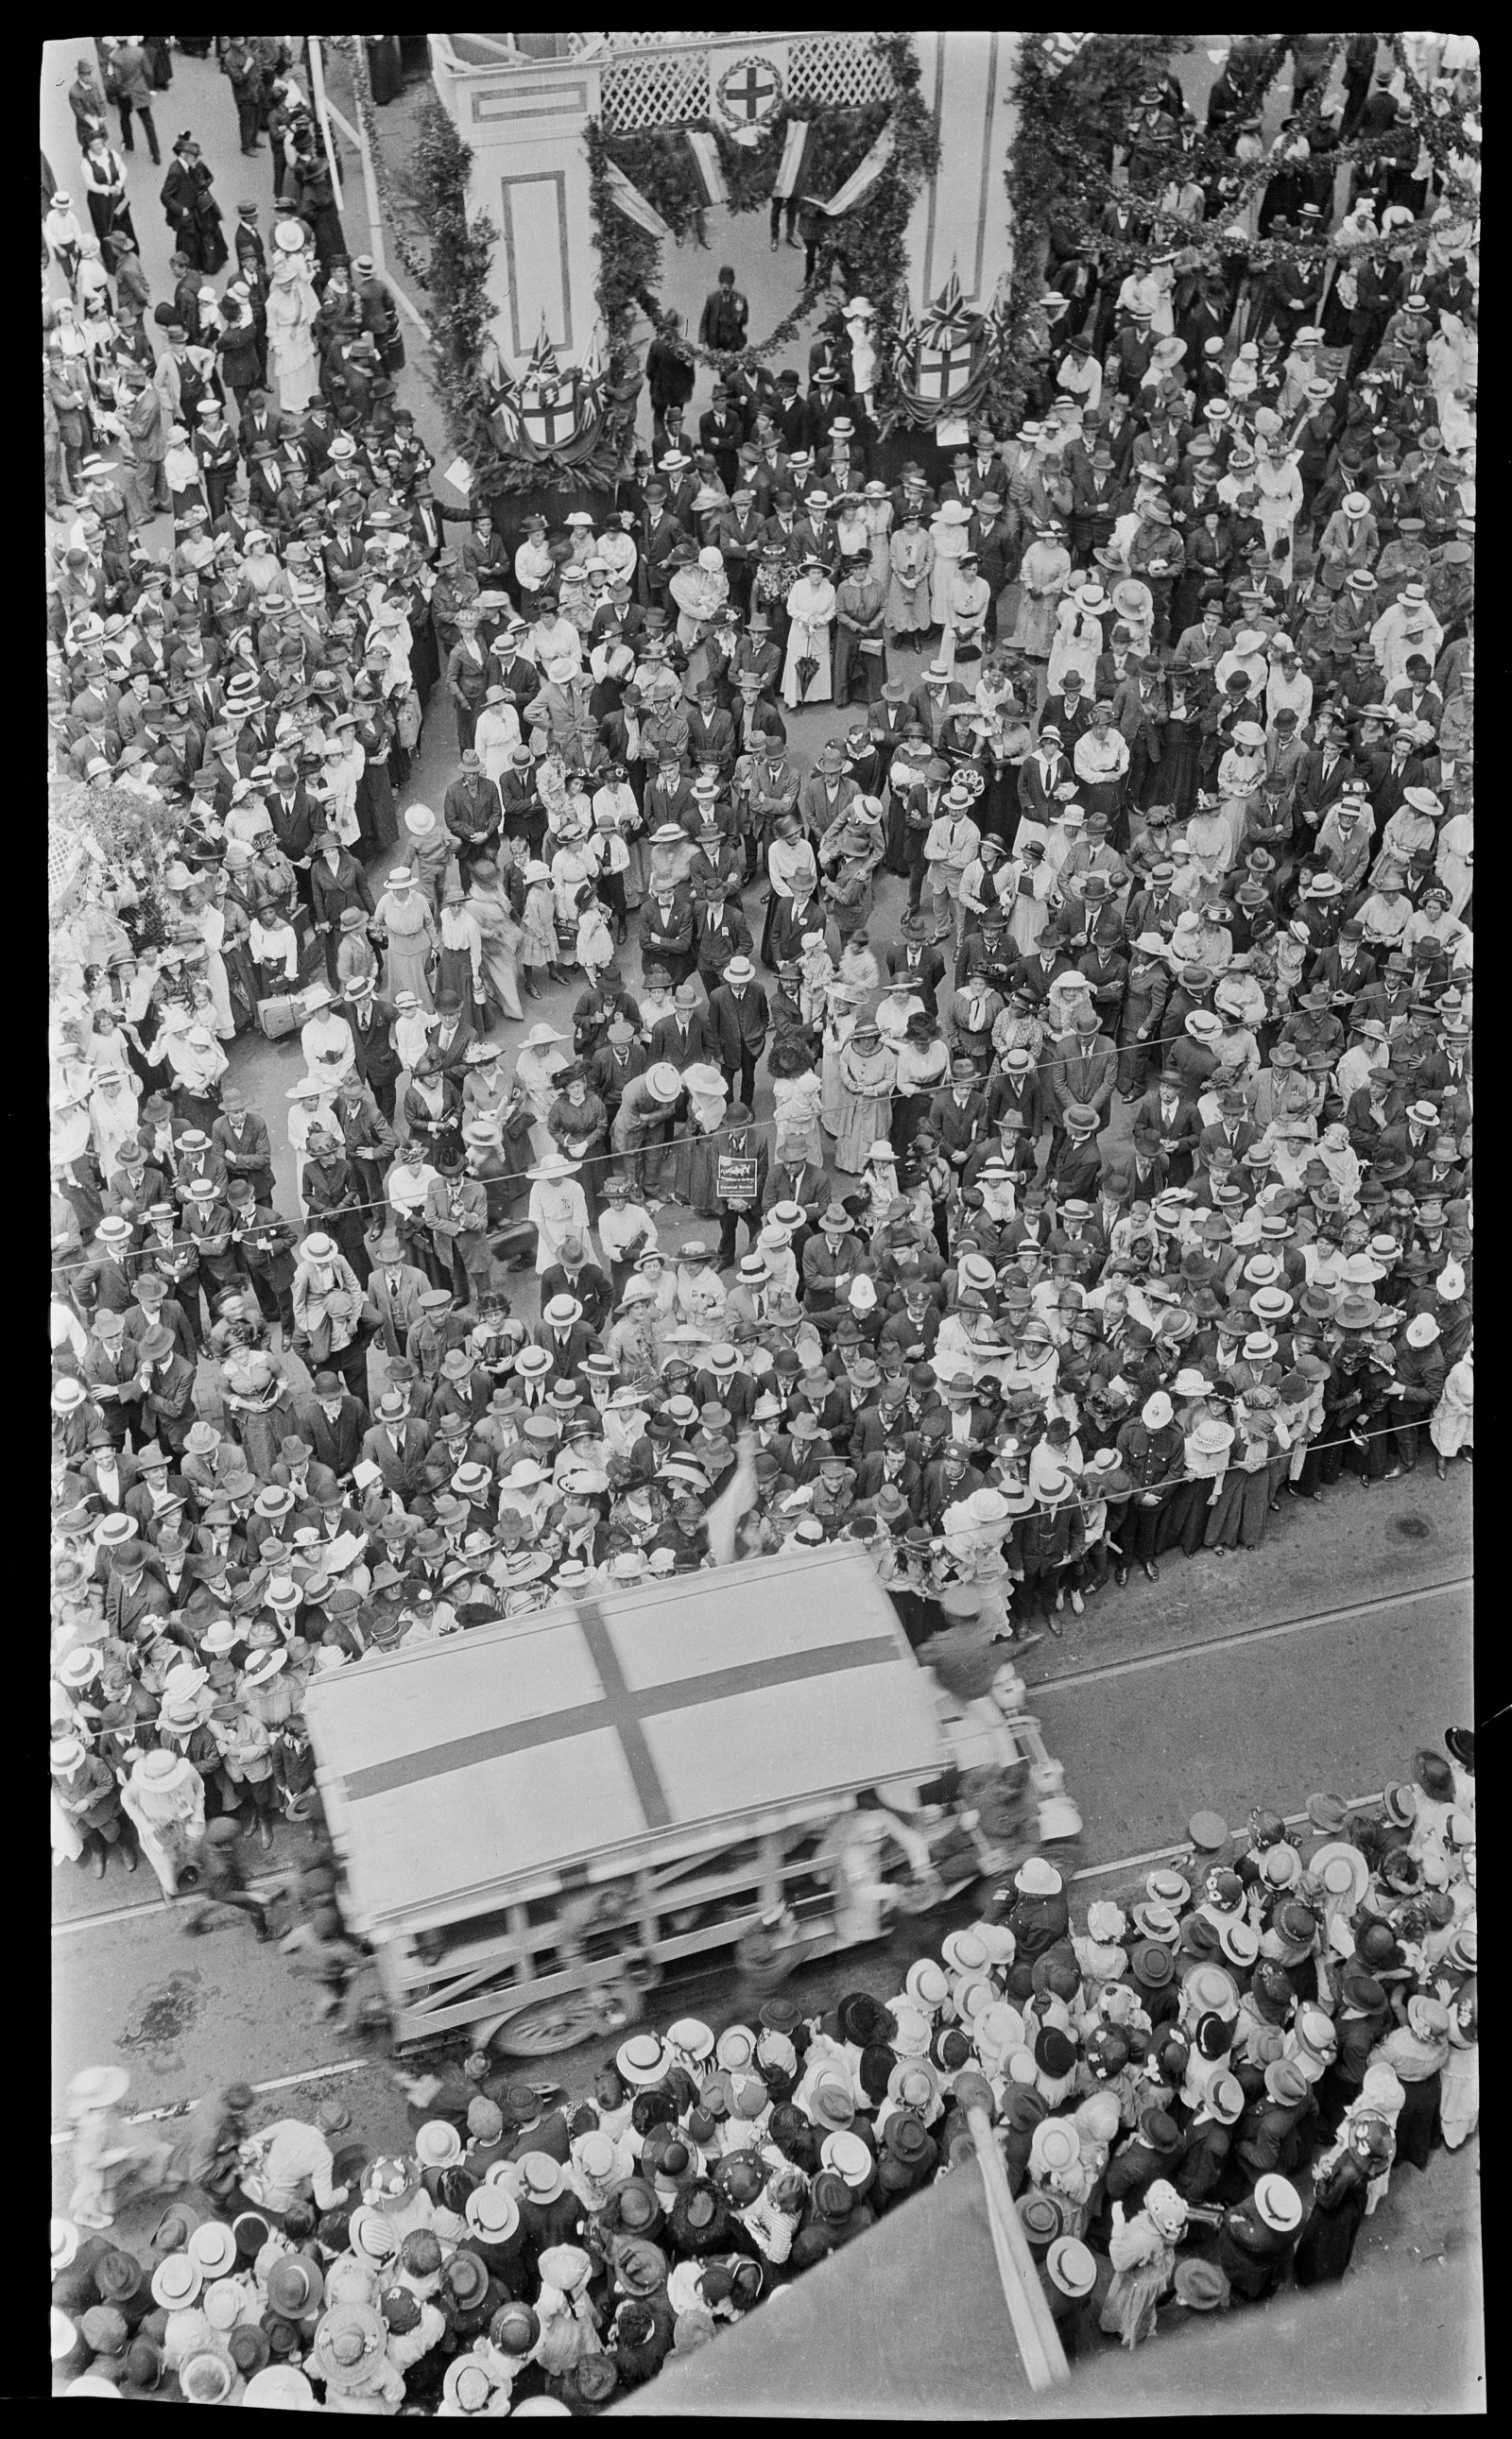 Black and white photo of large crowd from above.